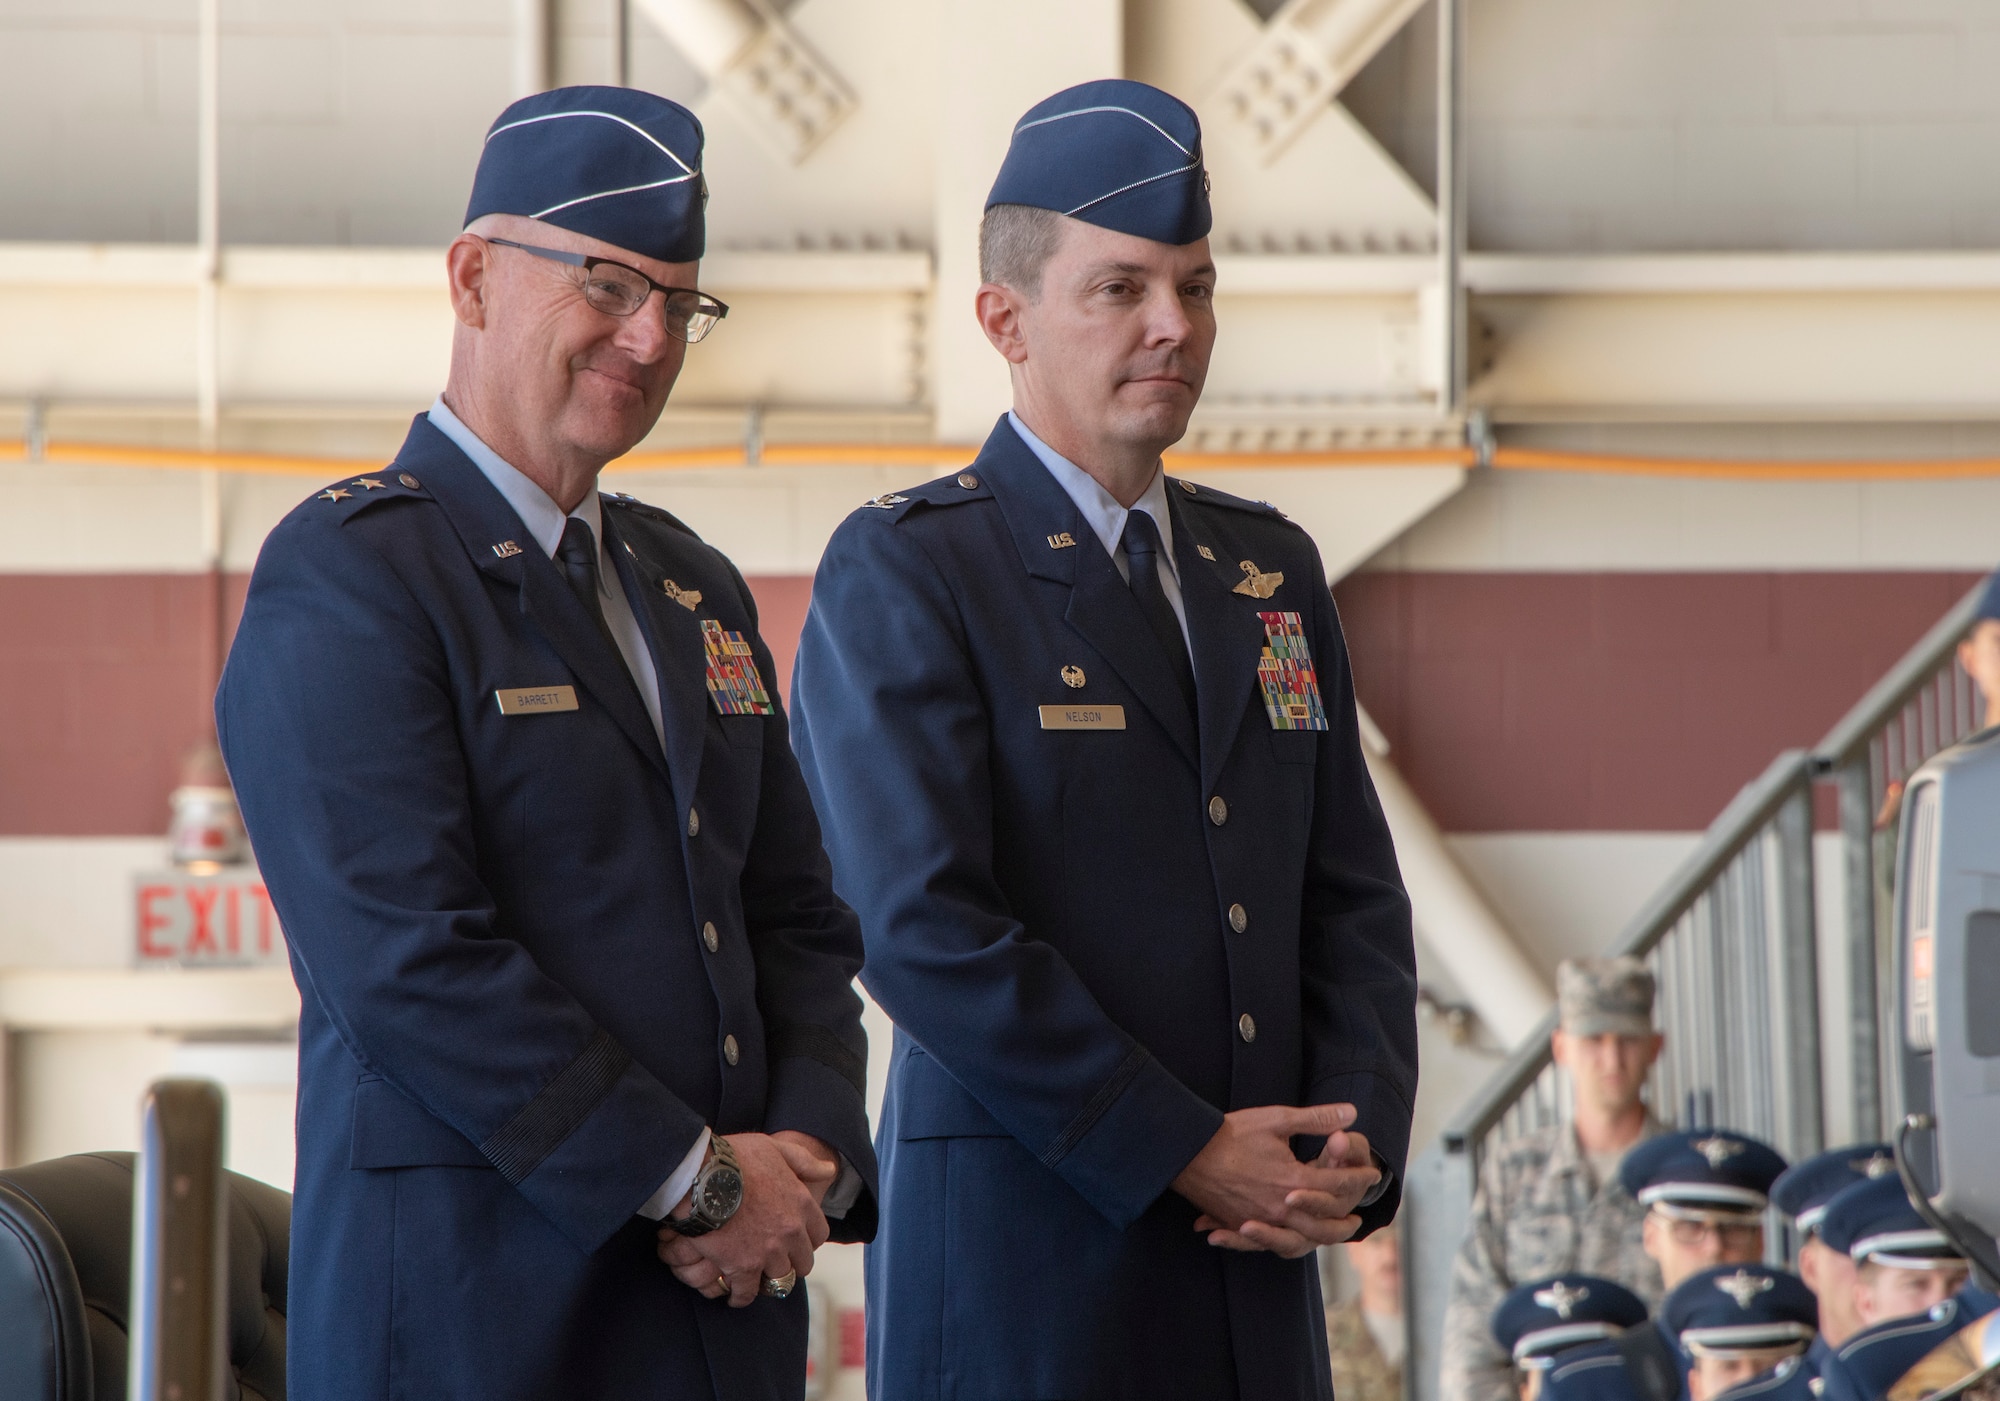 Maj. Gen. Sam Barrett (left), 18th Air Force commander, presides over the 60th Air Mobility Wing assumption of command ceremony at Travis Air Force Base, Calif., Sept. 18, 2018. Col. Jeff Nelson (right), assumed command of Air Mobility Command’s largest wing. (U.S. Air Force photo by Heide Couch)